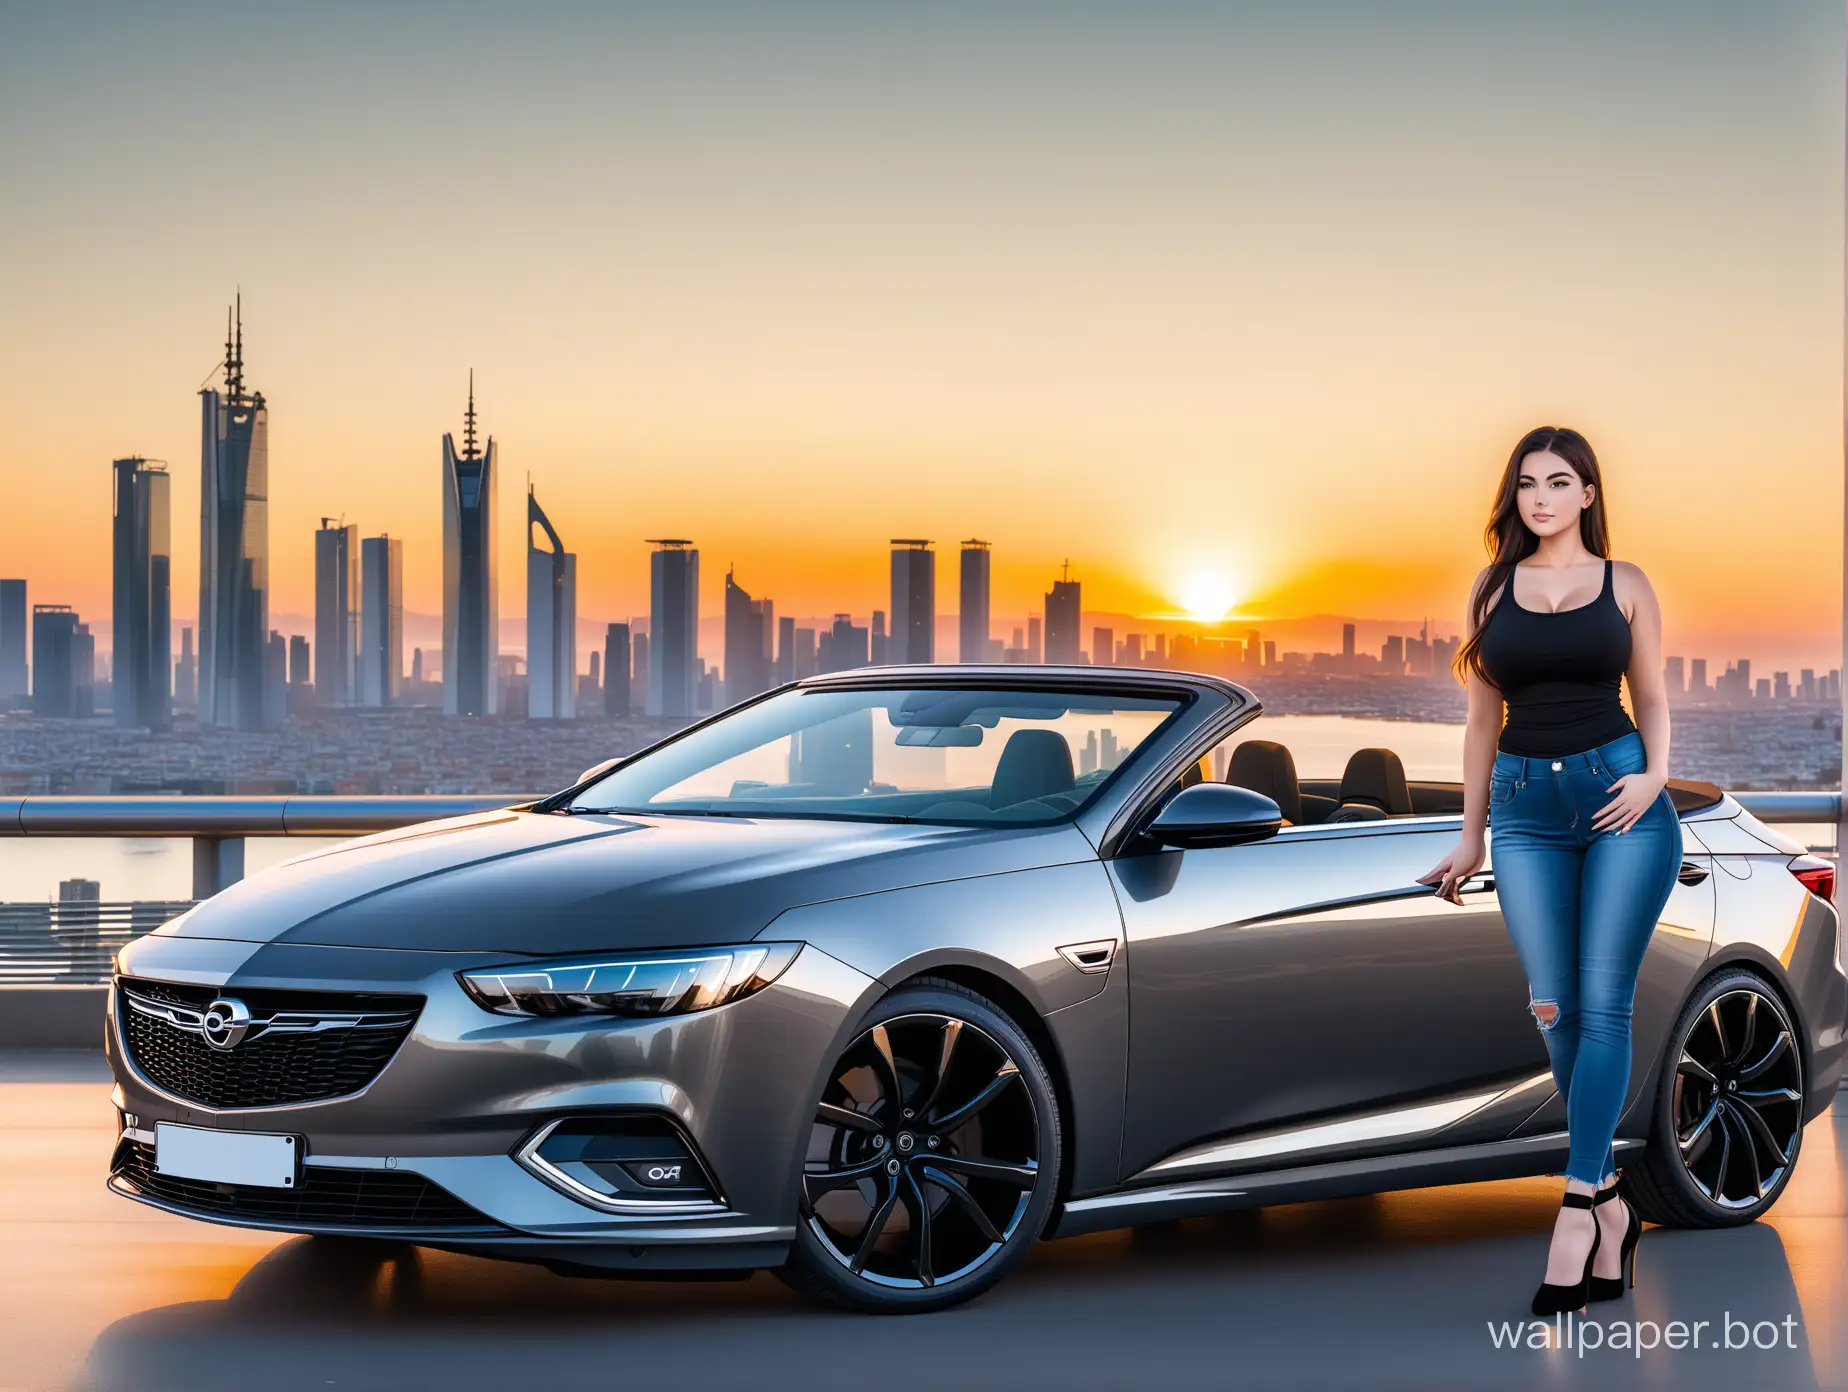 curvy brunette in jeans and black tank top with lace, high heels standing next to a Opel Insignia Grand Sport convertible car. The car is grey color. Futuristic city at sundown in the background. A wide shot of the car and the girl should be entirely visible.